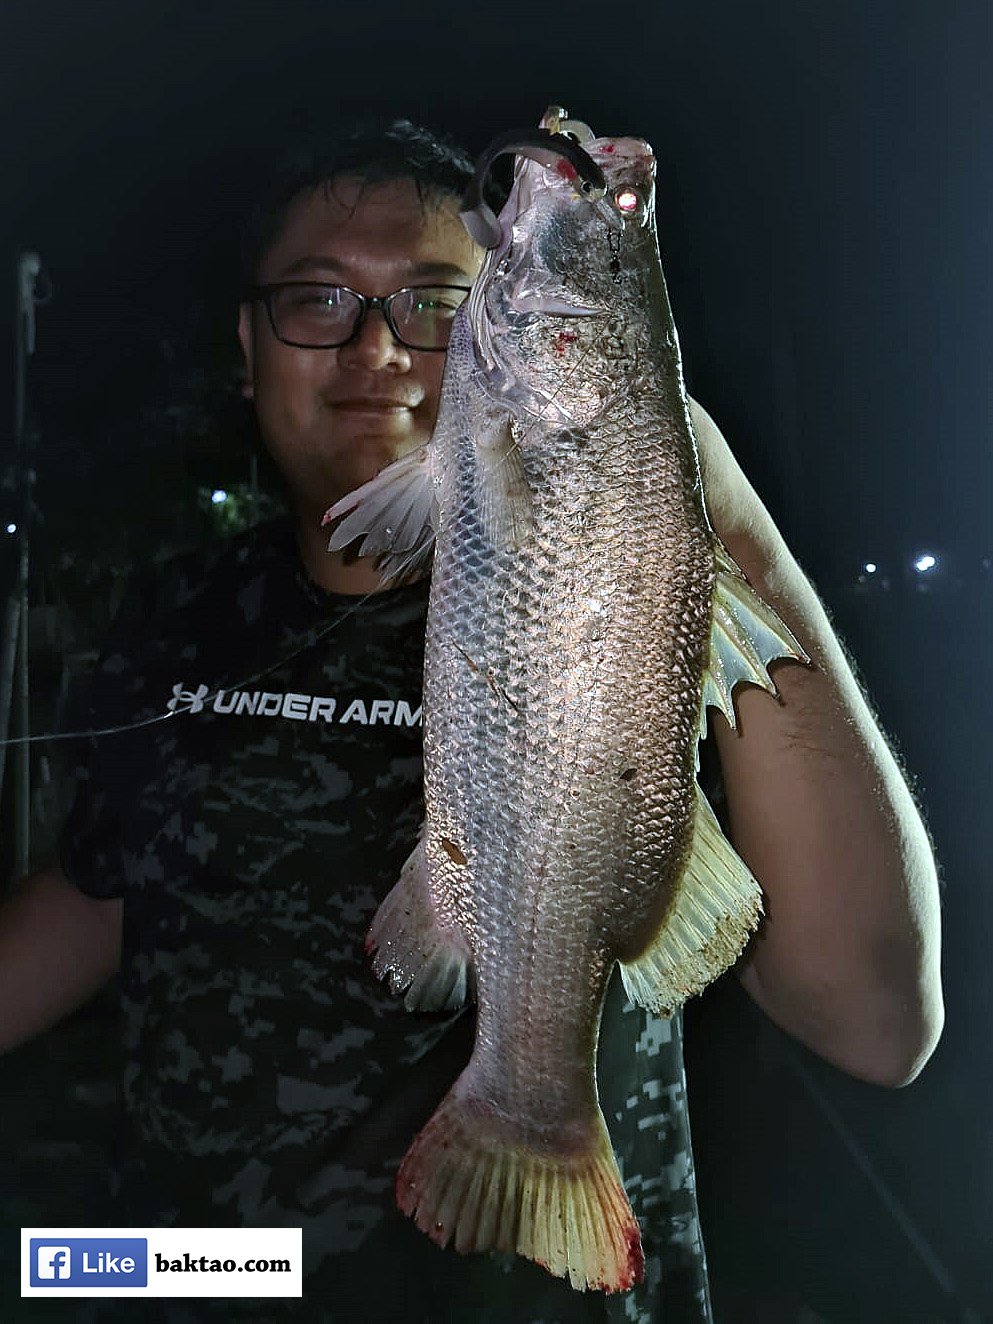 Fishing at D'Best Fishing (also known as Pasir Ris Main Pond or